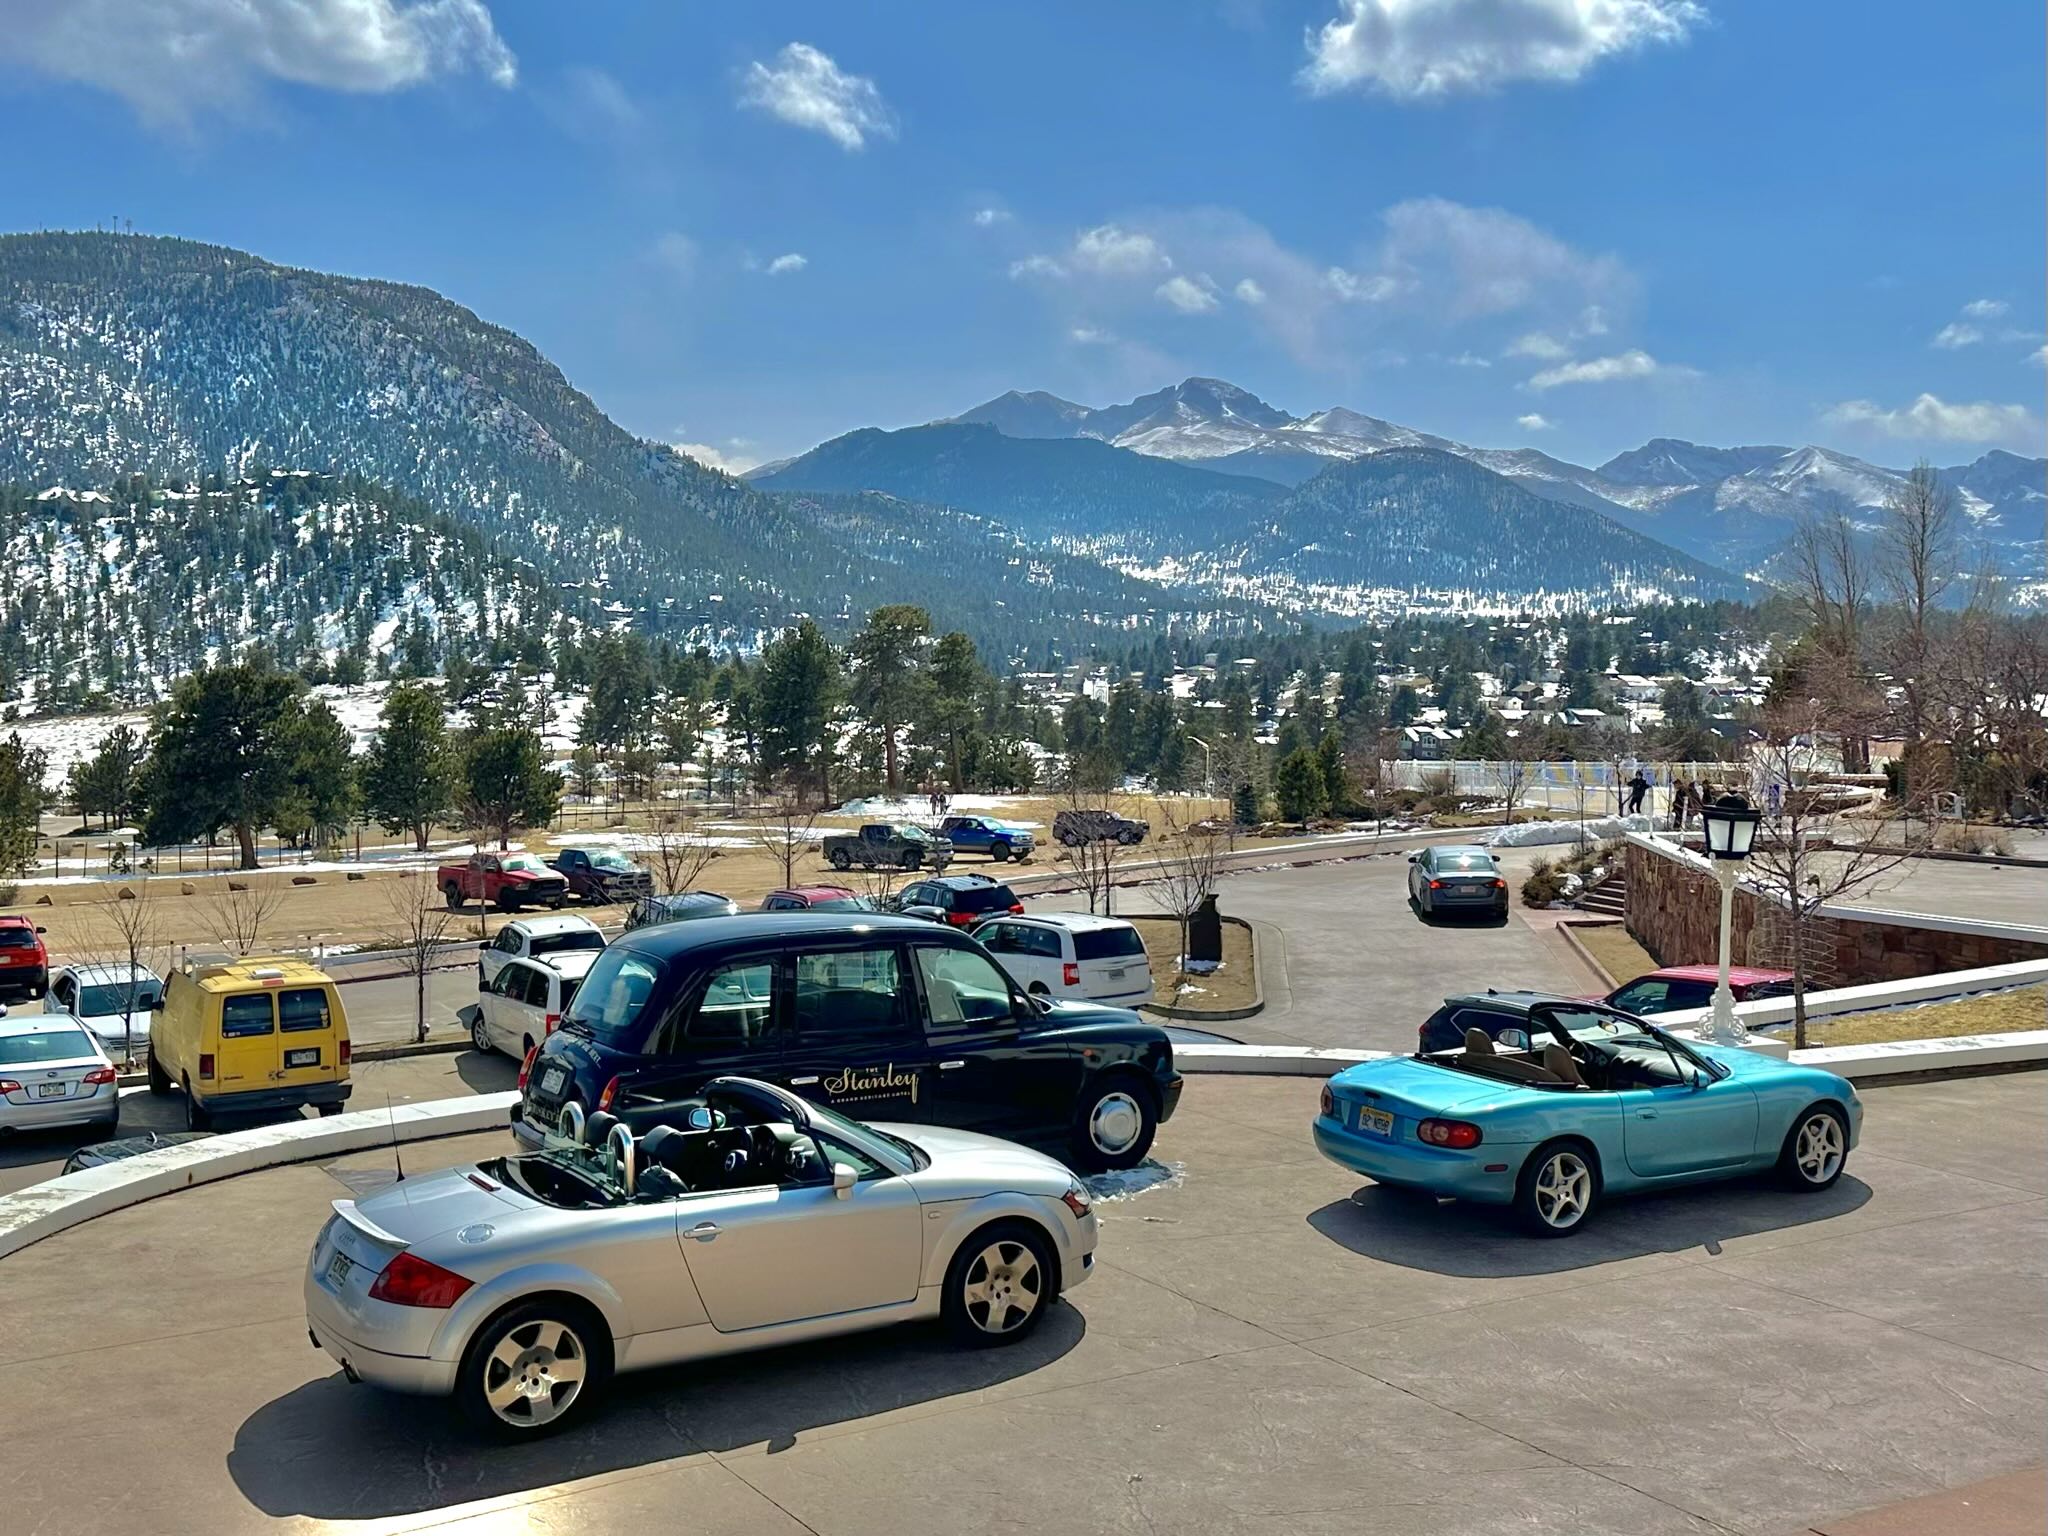 My silver Audi TT Roadster, a black London Taxi, and Manuel's sky blue miata at the Stanley Hotel. The Rocky Mountains are in the background.